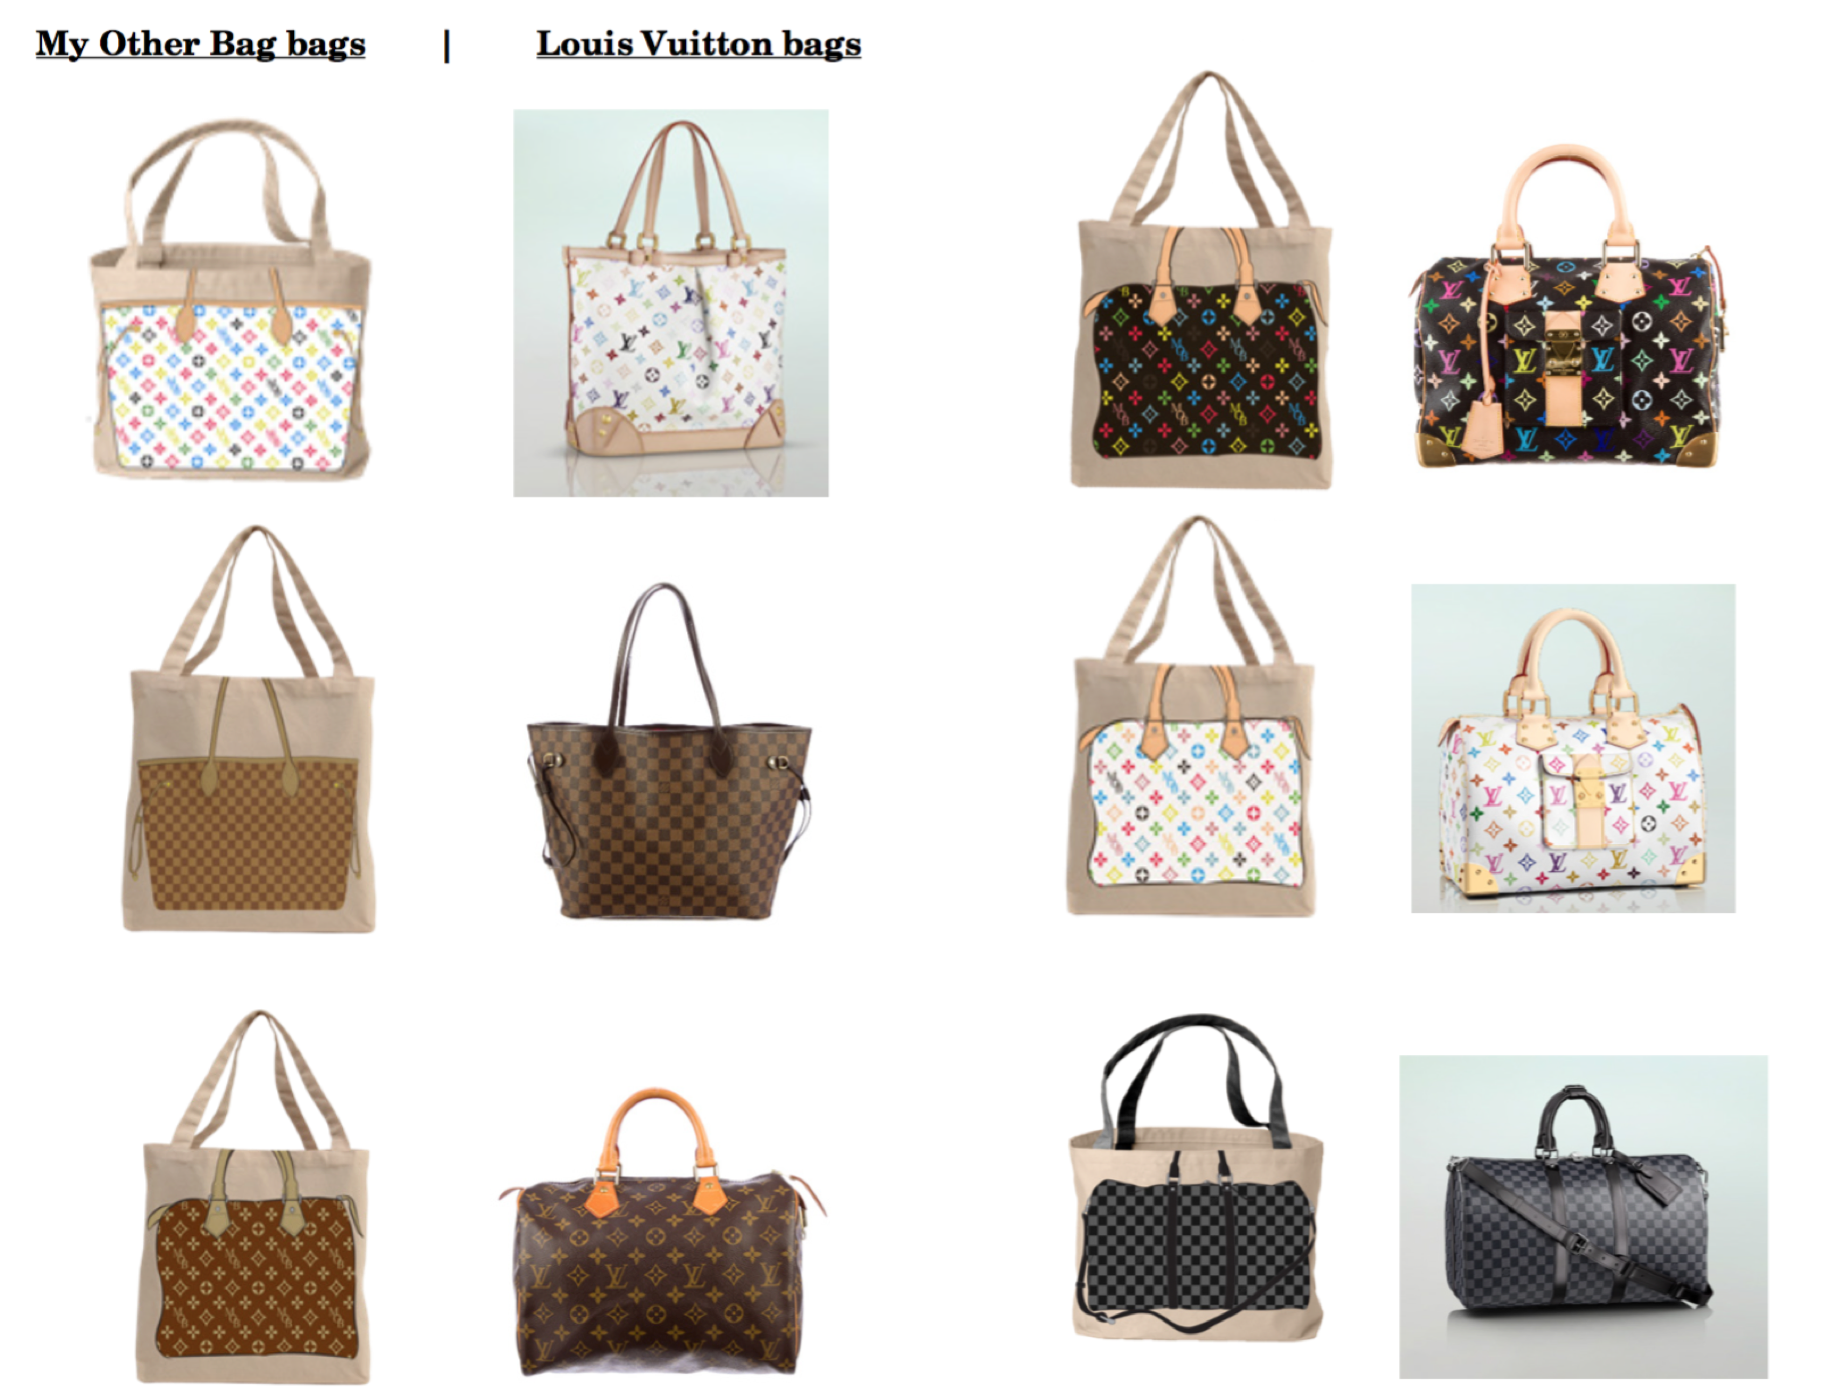 Louis Vuitton Wants the Supreme Court to Hear its Case Against My